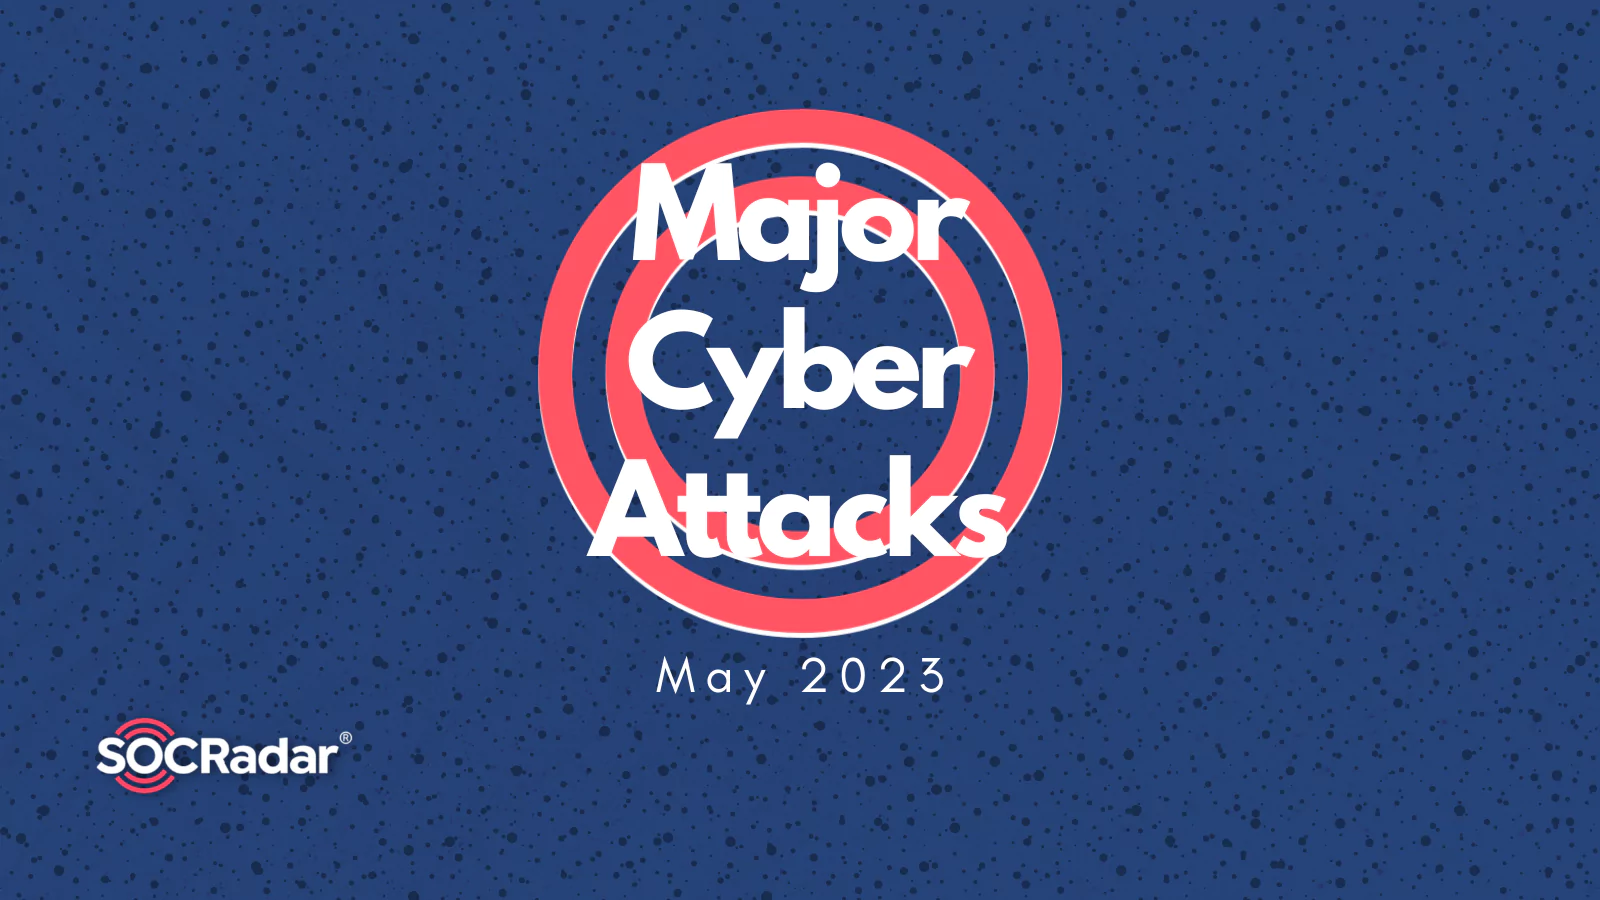 SOCRadar® Cyber Intelligence Inc. | Major Cyberattacks in Review: May 2023